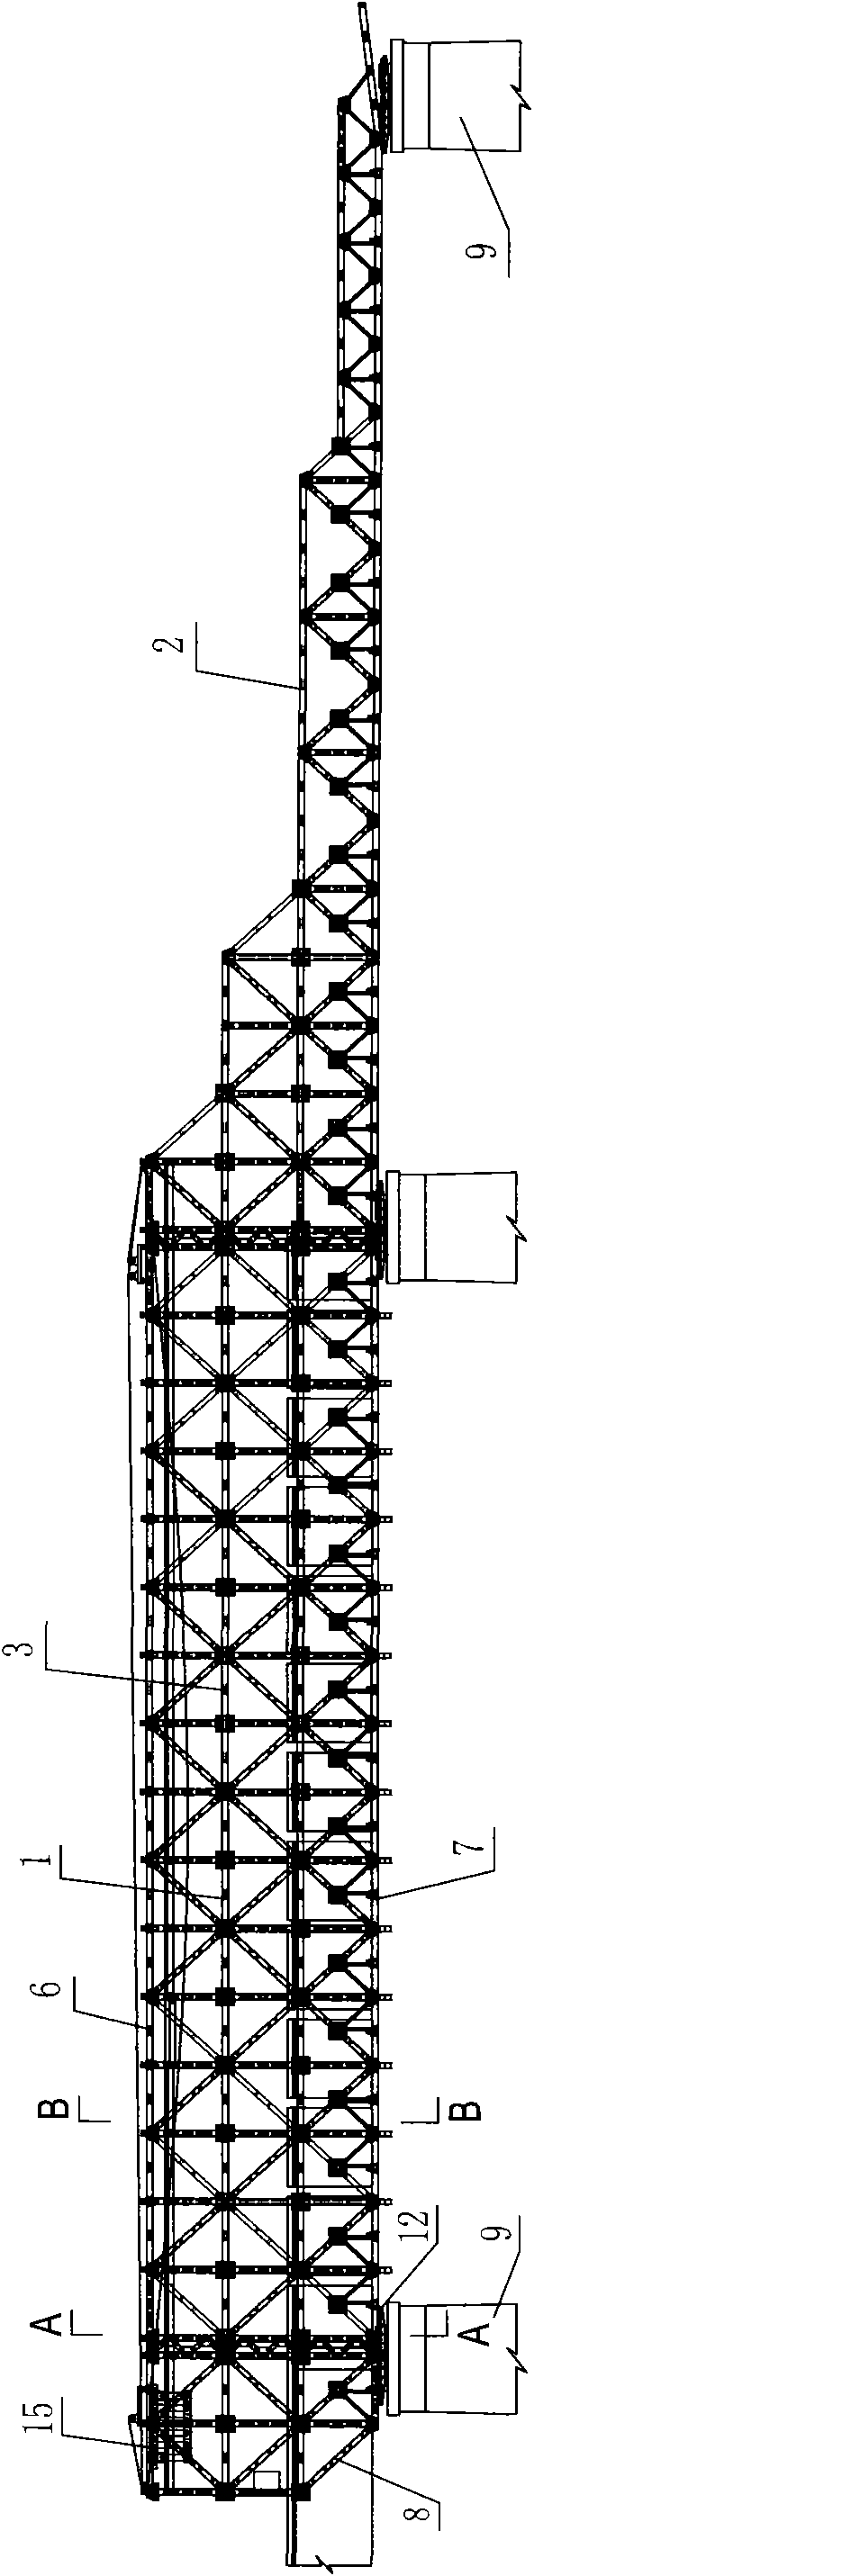 Large-span section assembling bridge manufacturing machine and assembling construction process thereof